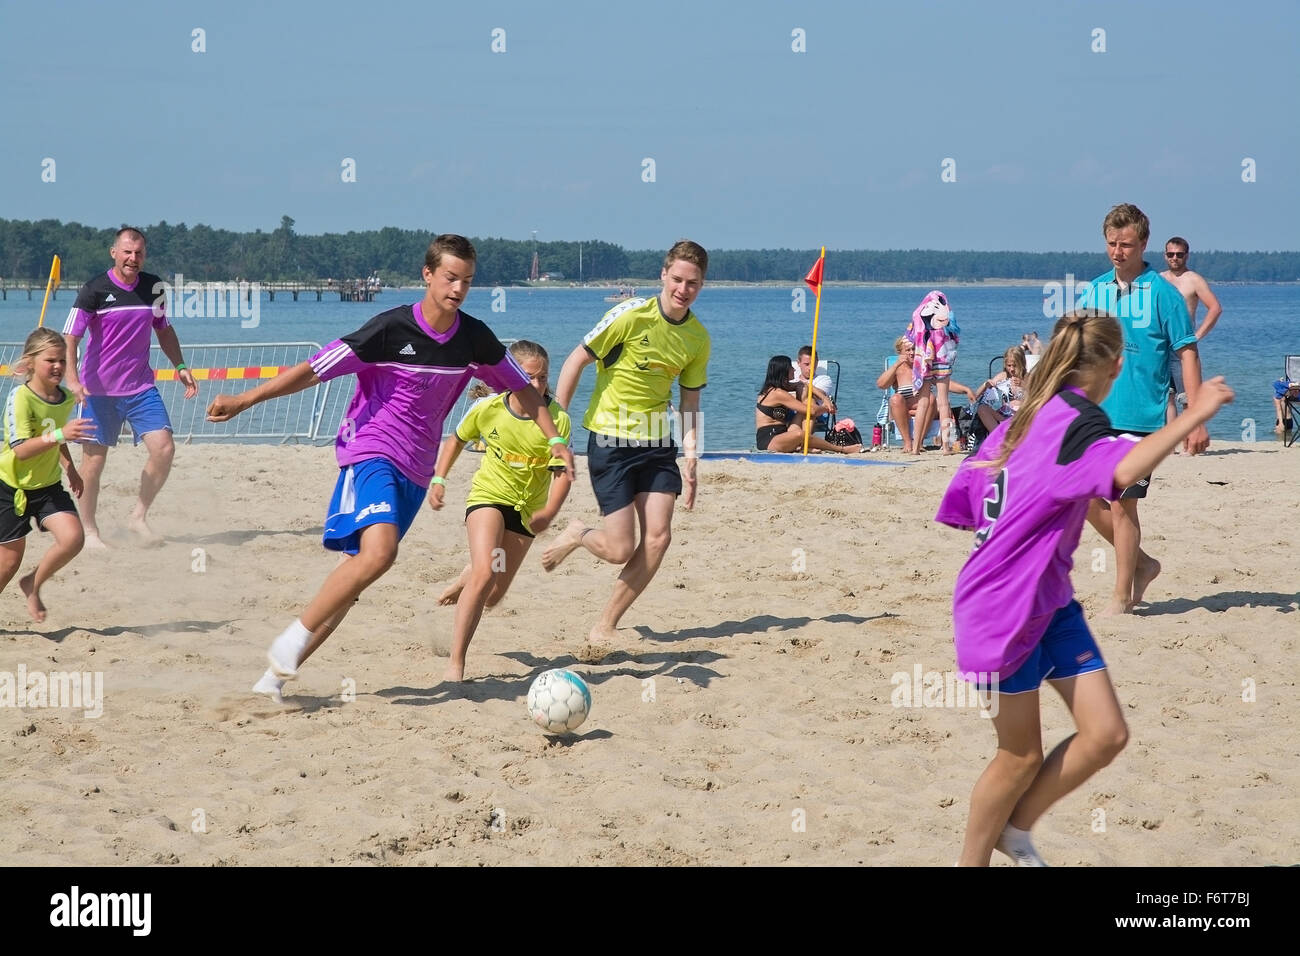 Beach soccer game in the yearly tournament at Tappet beach in Åhus Sweden in June 2014. Stock Photo